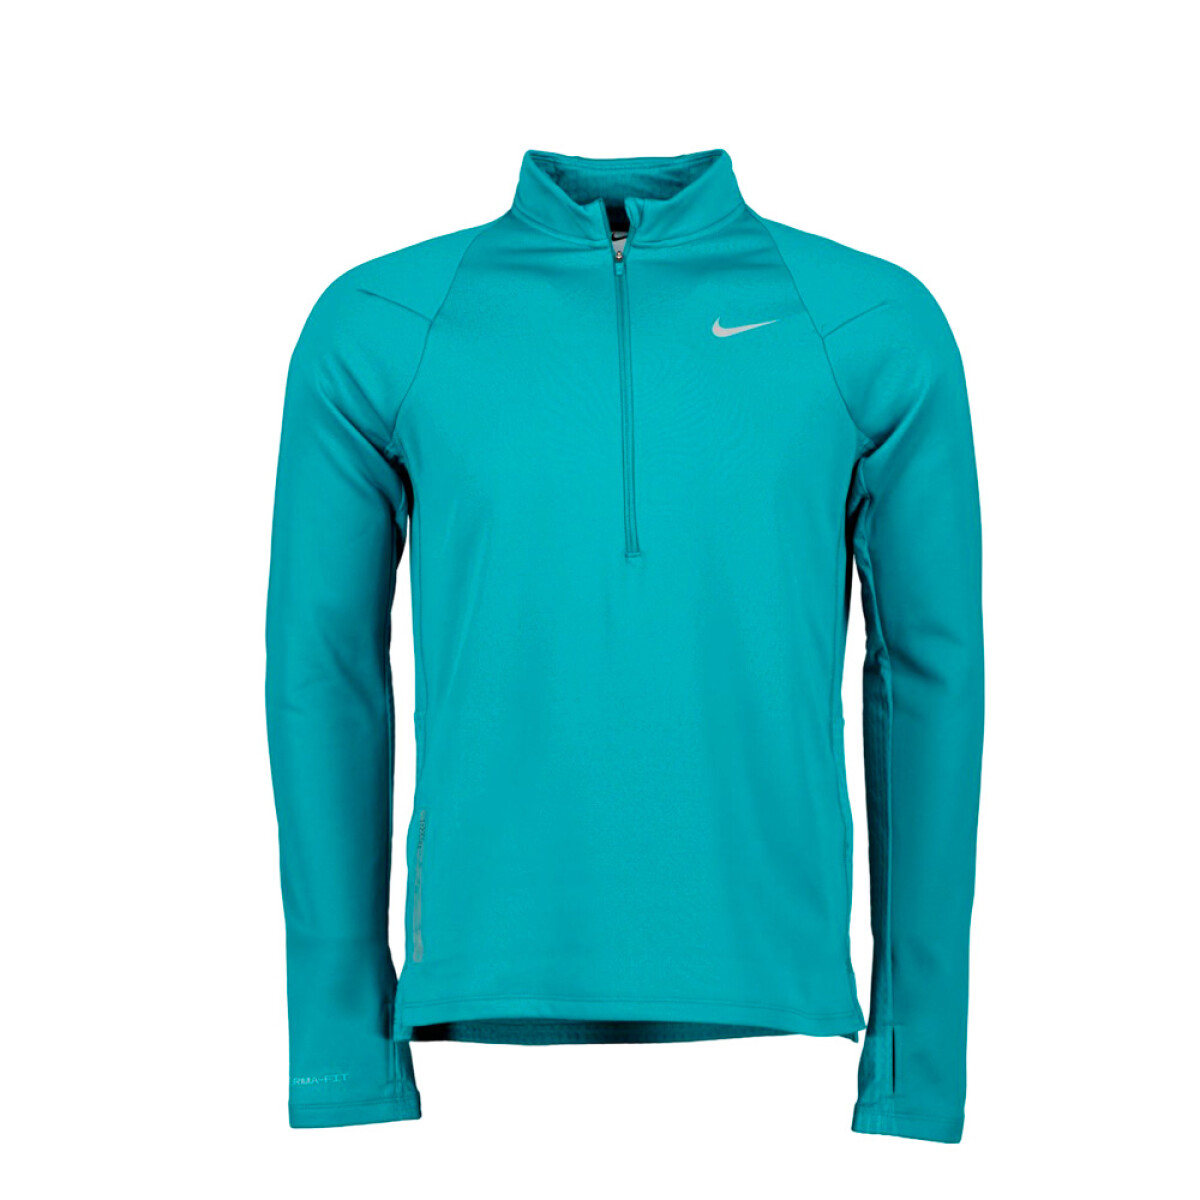 REMERA NIKE THERMA-FIT RUN DIVISION ELEMENT - 379 